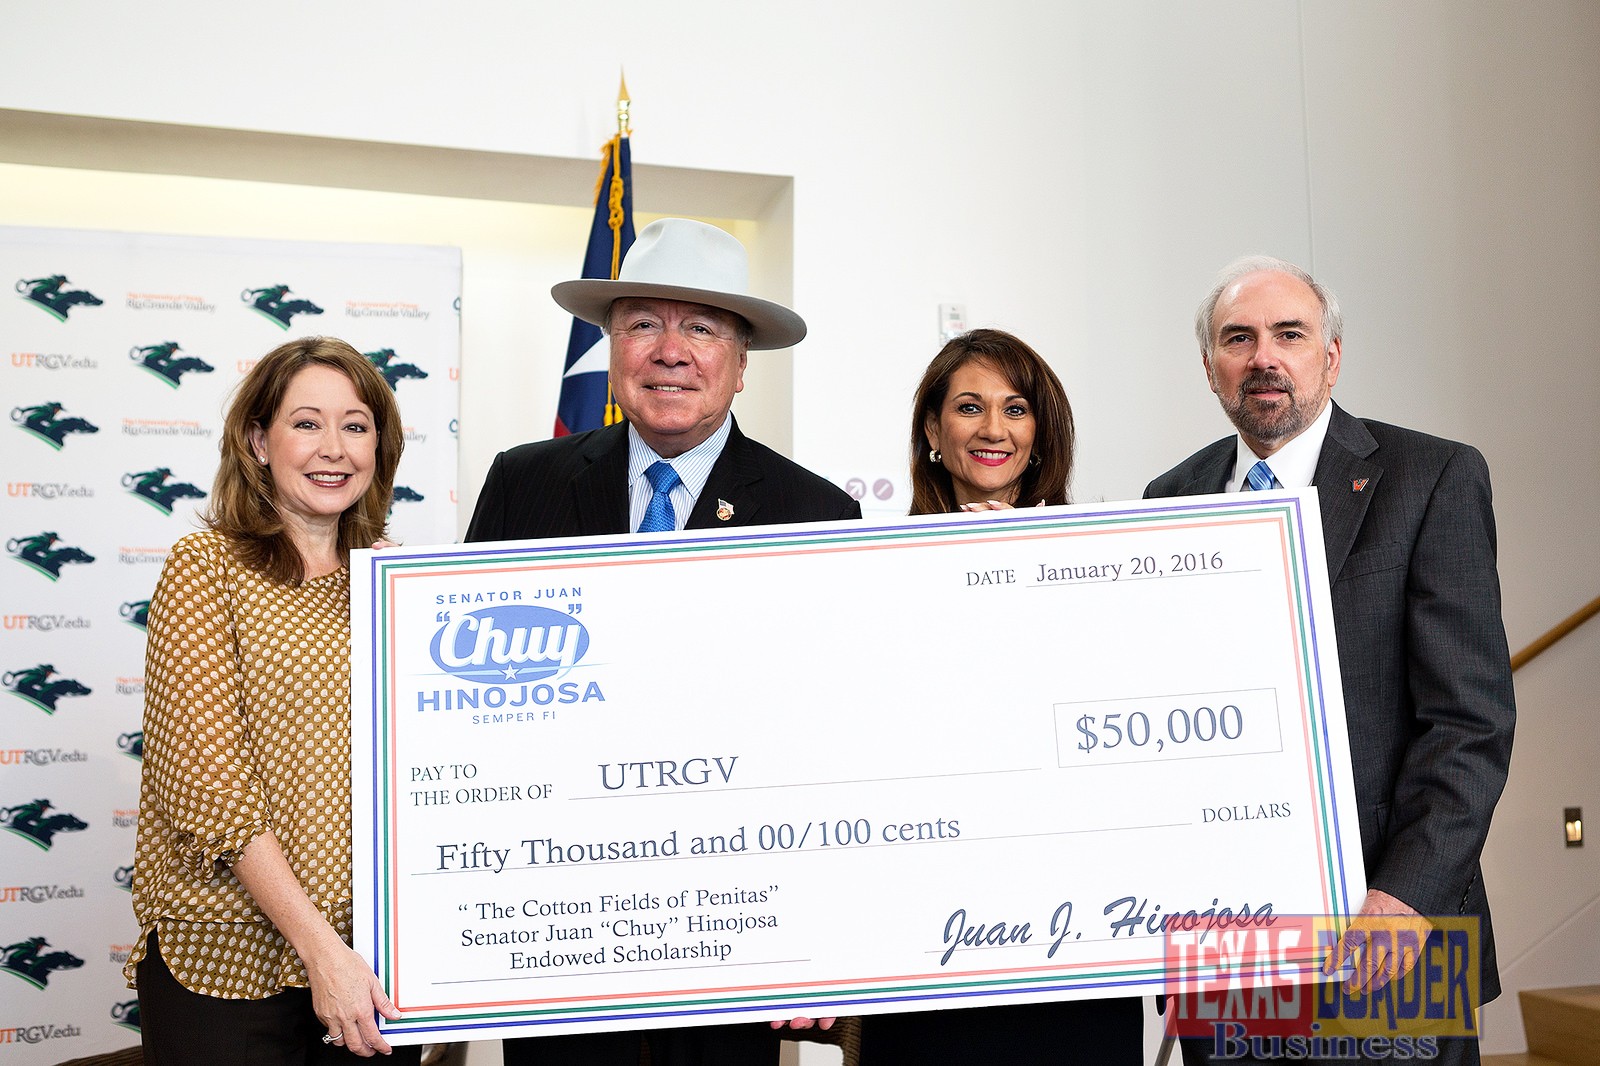 Sen. Juan ‘Chuy’ Hinojosa (wearing his trademark hat) on Wednesday, Jan. 20, 2016, presented a check for $50,000 to UTRGV President Guy Bailey (at right), during a press conference at the Performing Arts Center on the UTRGV Edinburg Campus. Also shown here are Dr. Kelly Cronin, UTRGV vice president for Advancement (at left) and Veronica Gonzales, UTRGV vice president for Government and Community Relations. The gift will fund scholarships and supports the already established ‘The Cotton Fields of Peñitas’ Senator Juan ‘Chuy’ Hinojosa Endowed Scholarship.’ (UTRGV Photo by Paul Chouy)